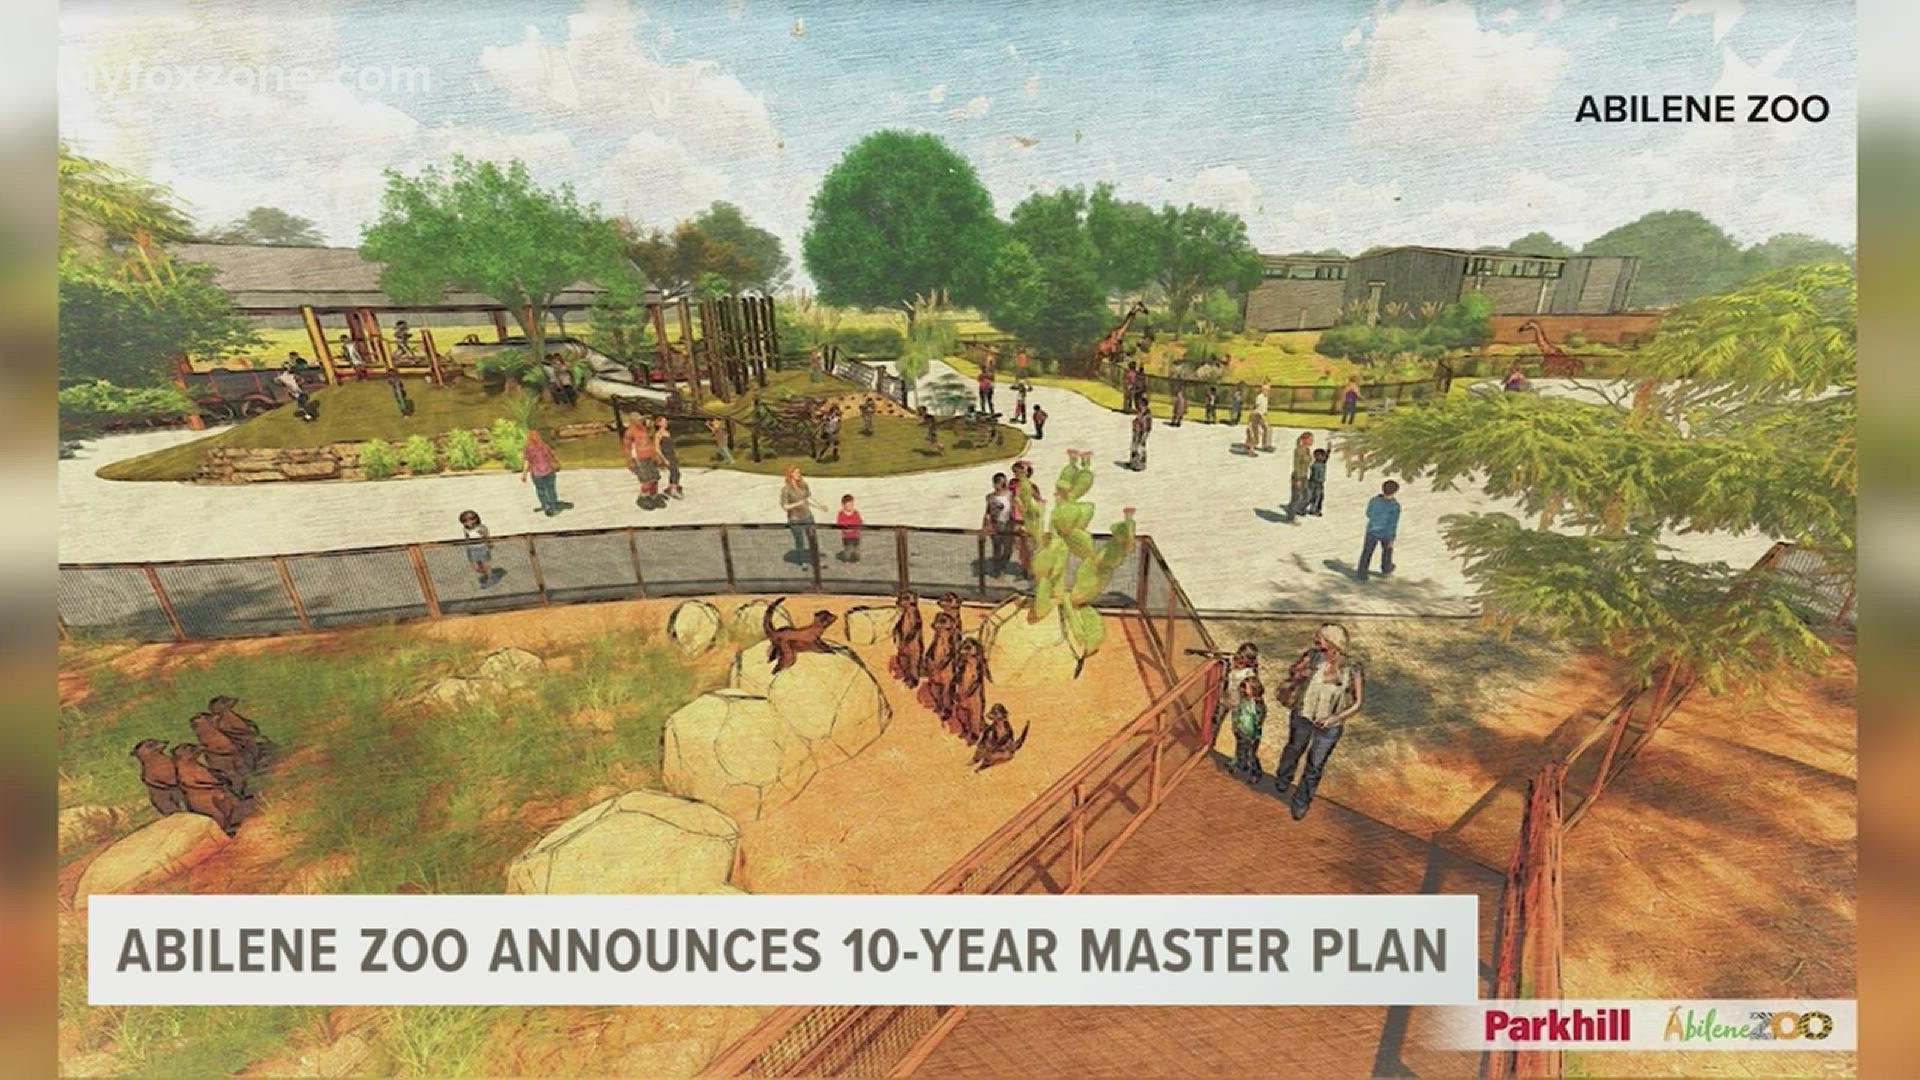 In a decade, the Big Country will be able to enjoy new habitats, amenities and attractions at the Abilene Zoo.